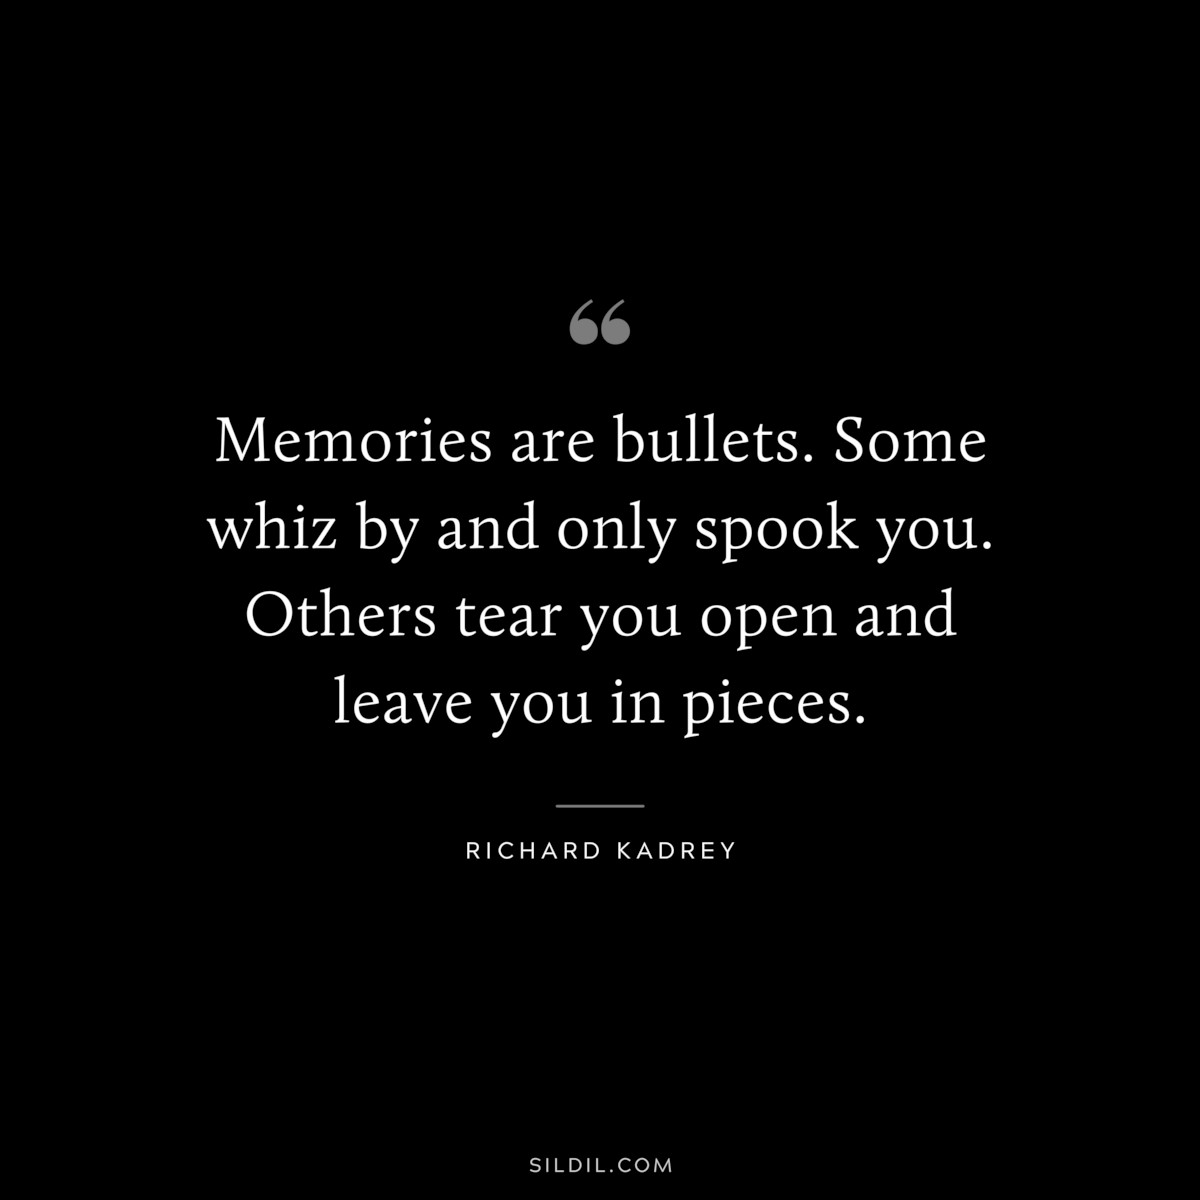 Memories are bullets. Some whiz by and only spook you. Others tear you open and leave you in pieces. ― Richard Kadrey